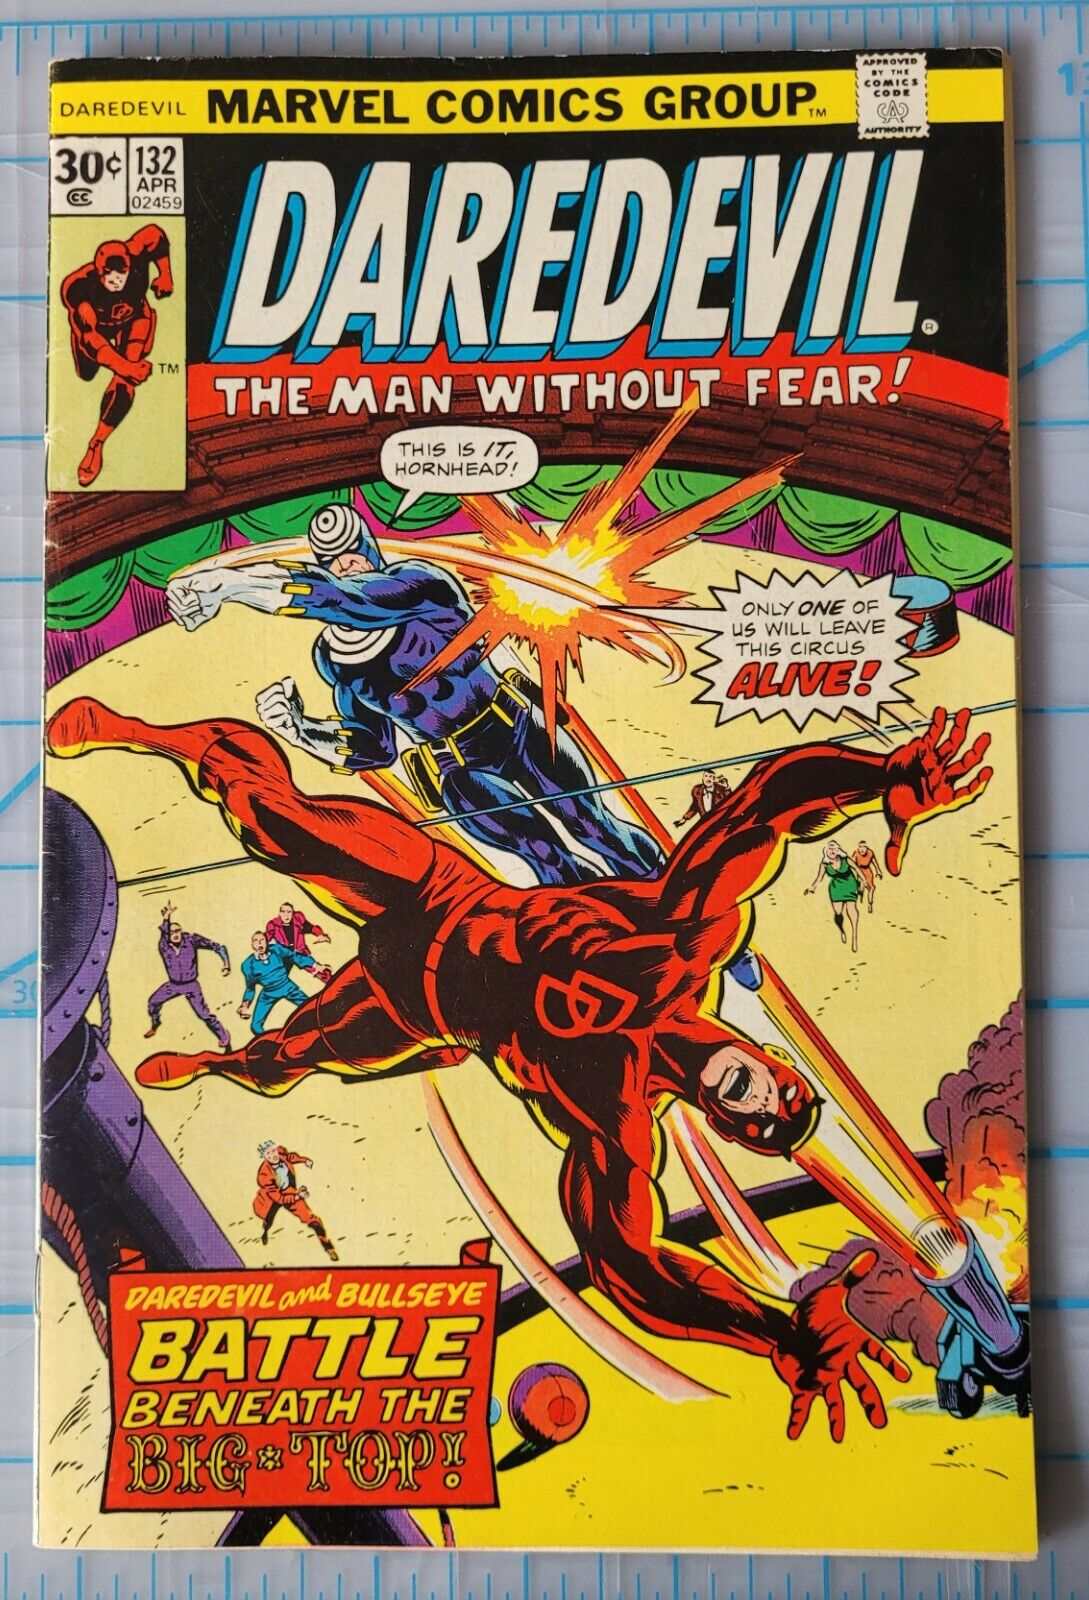 DAREDEVIL 132 (1976) 30 CENT VARIANT - VF- 7.5 OW PAGES, 2ND APP BULLSEYE